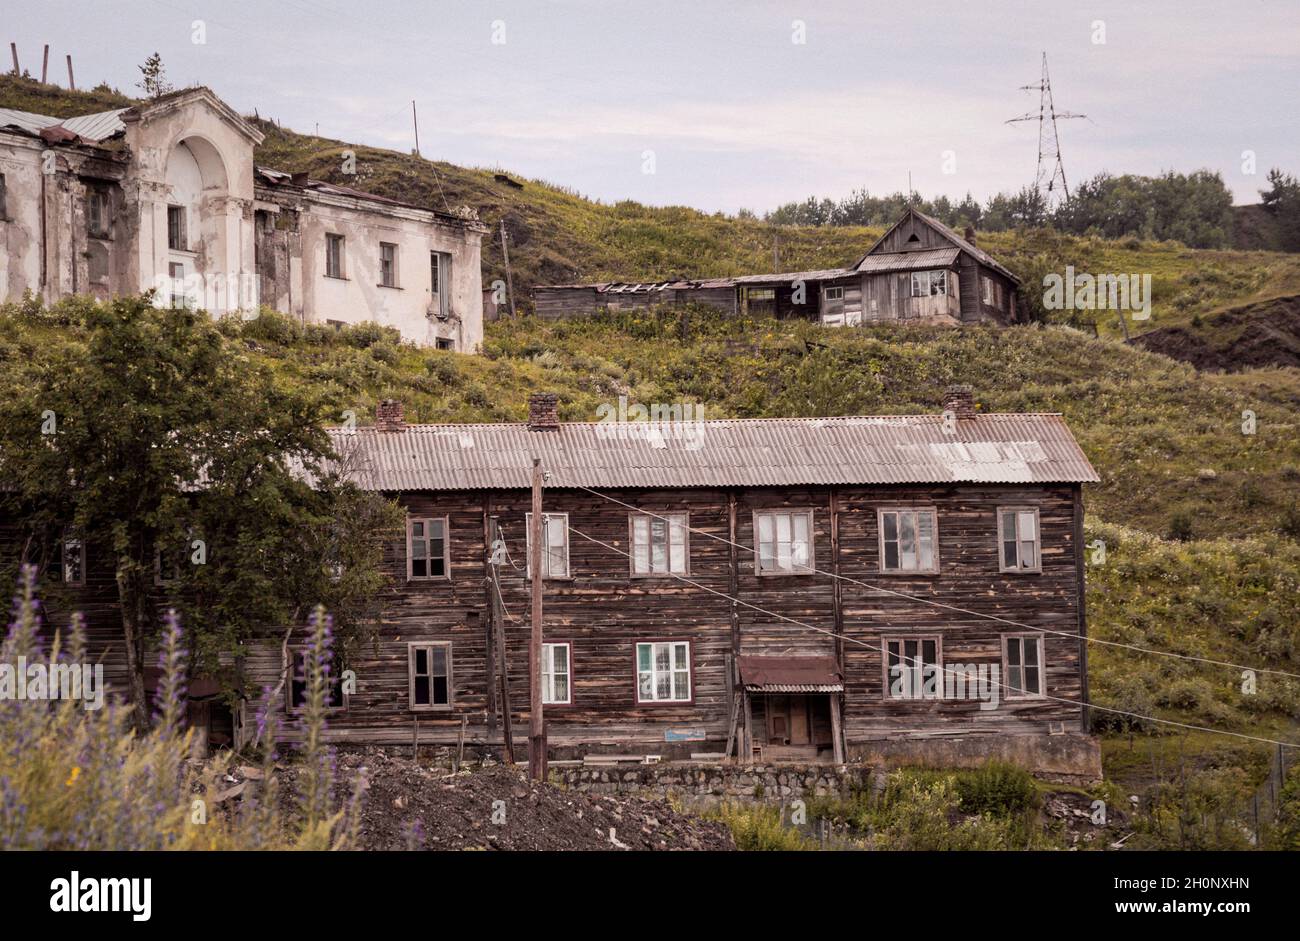 Old abandoned wooden two storey building in deserted old town or village on the slope of the hill surrounded wit similarly semi-ruined houses Stock Photo